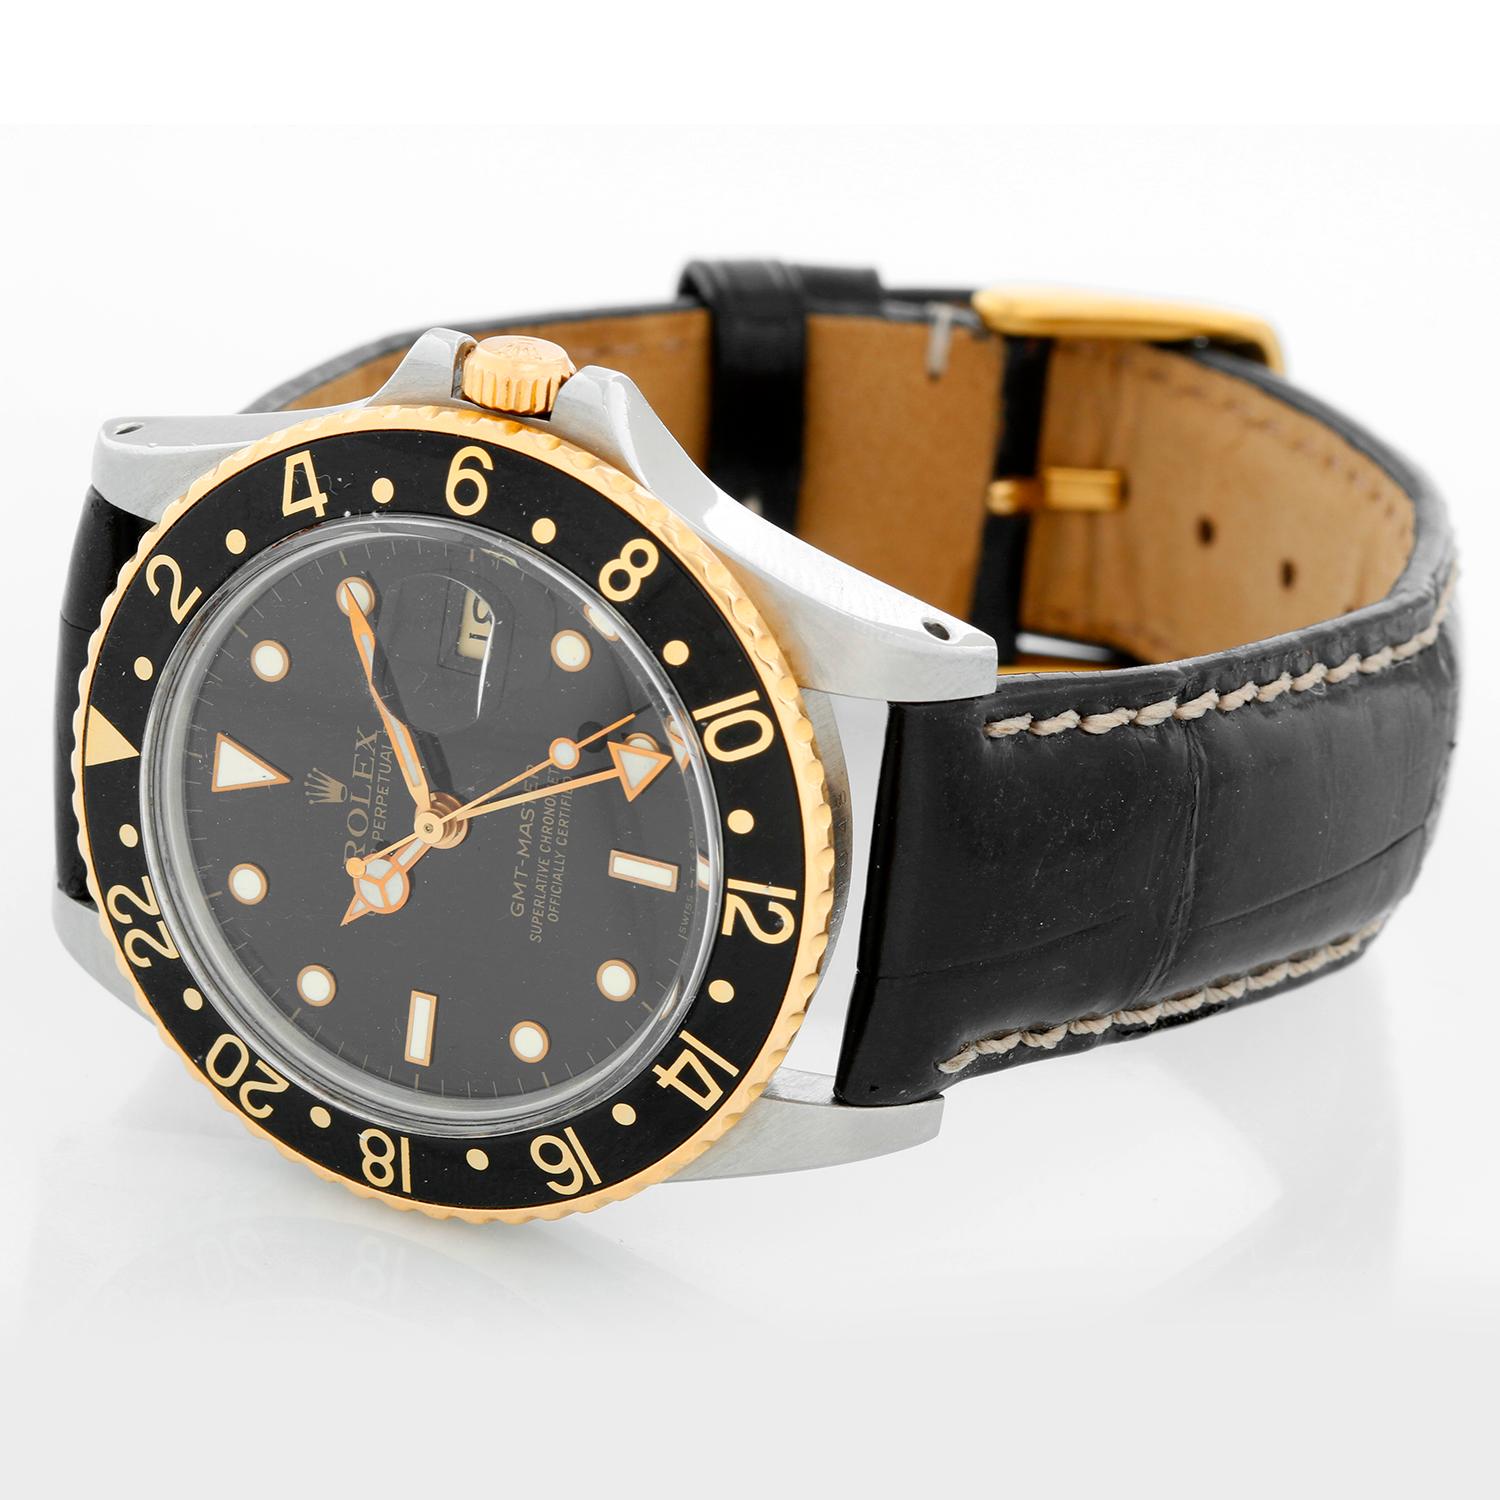 Rolex 2-Tone GMT-Master 16753 on a Strap - Automatic winding. Stainless steel with gold bezel ( 40 mm ). Black dial with gold framed hour markers with date. Black alligator strap with tang buckle. Pre-owned with Rolex box and books
